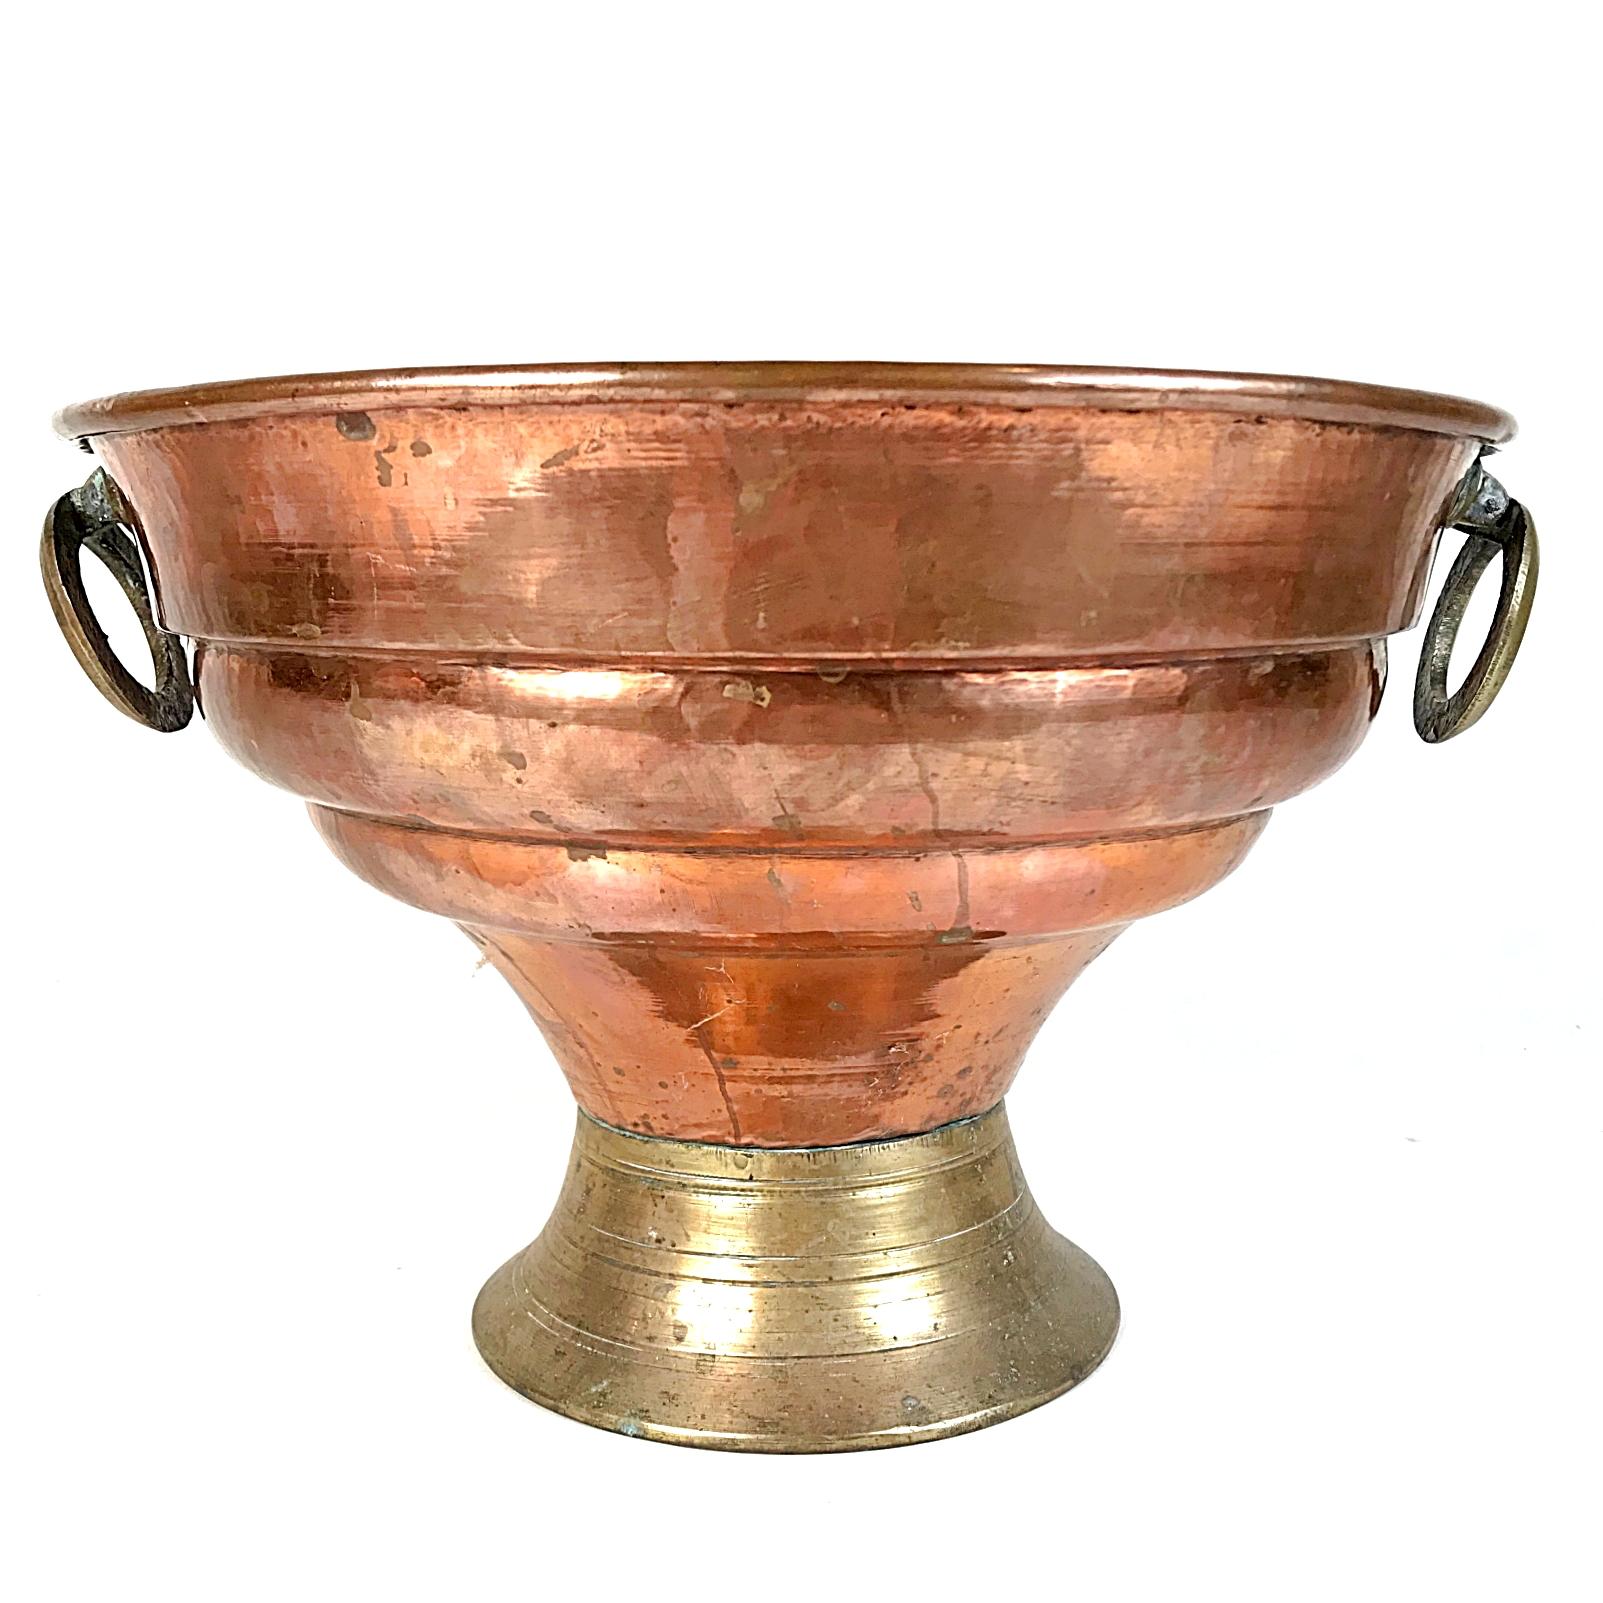 Rustic Large Antique French Copper Brass Champagne / Wine Cooler, 1850s, France